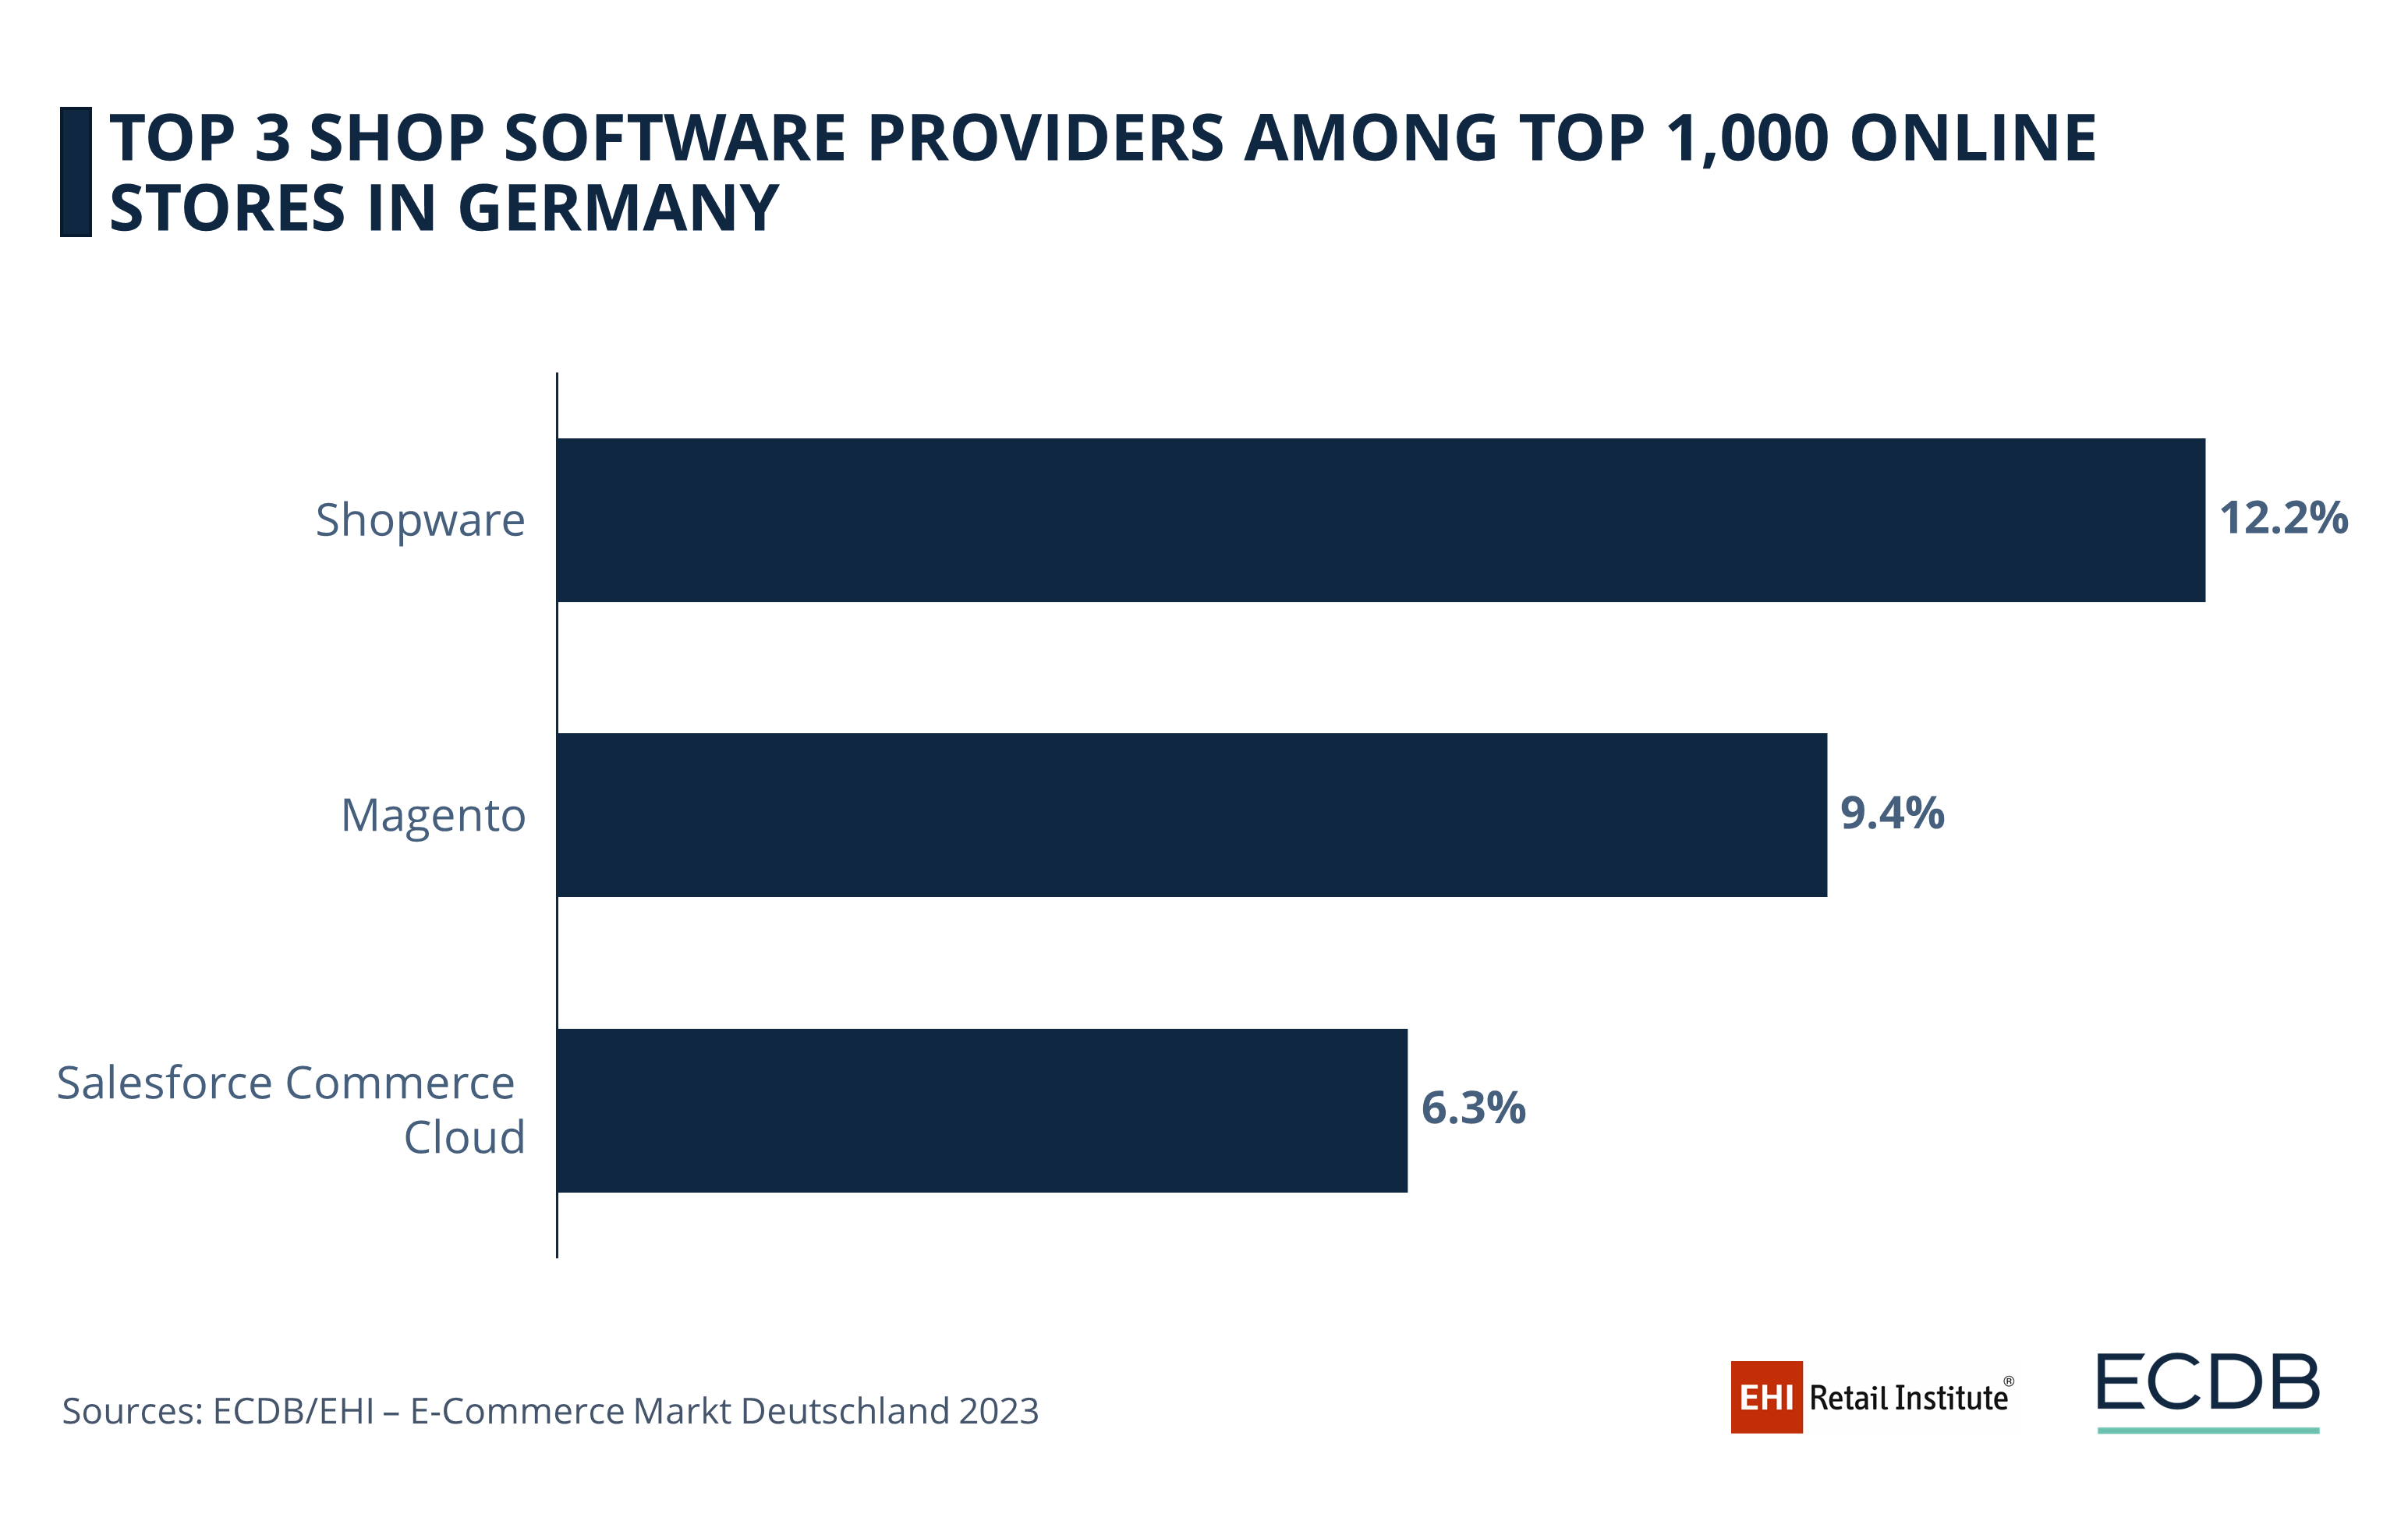 Top 3 Shop Software Providers Among Top 1,000 Online Stores in Germany